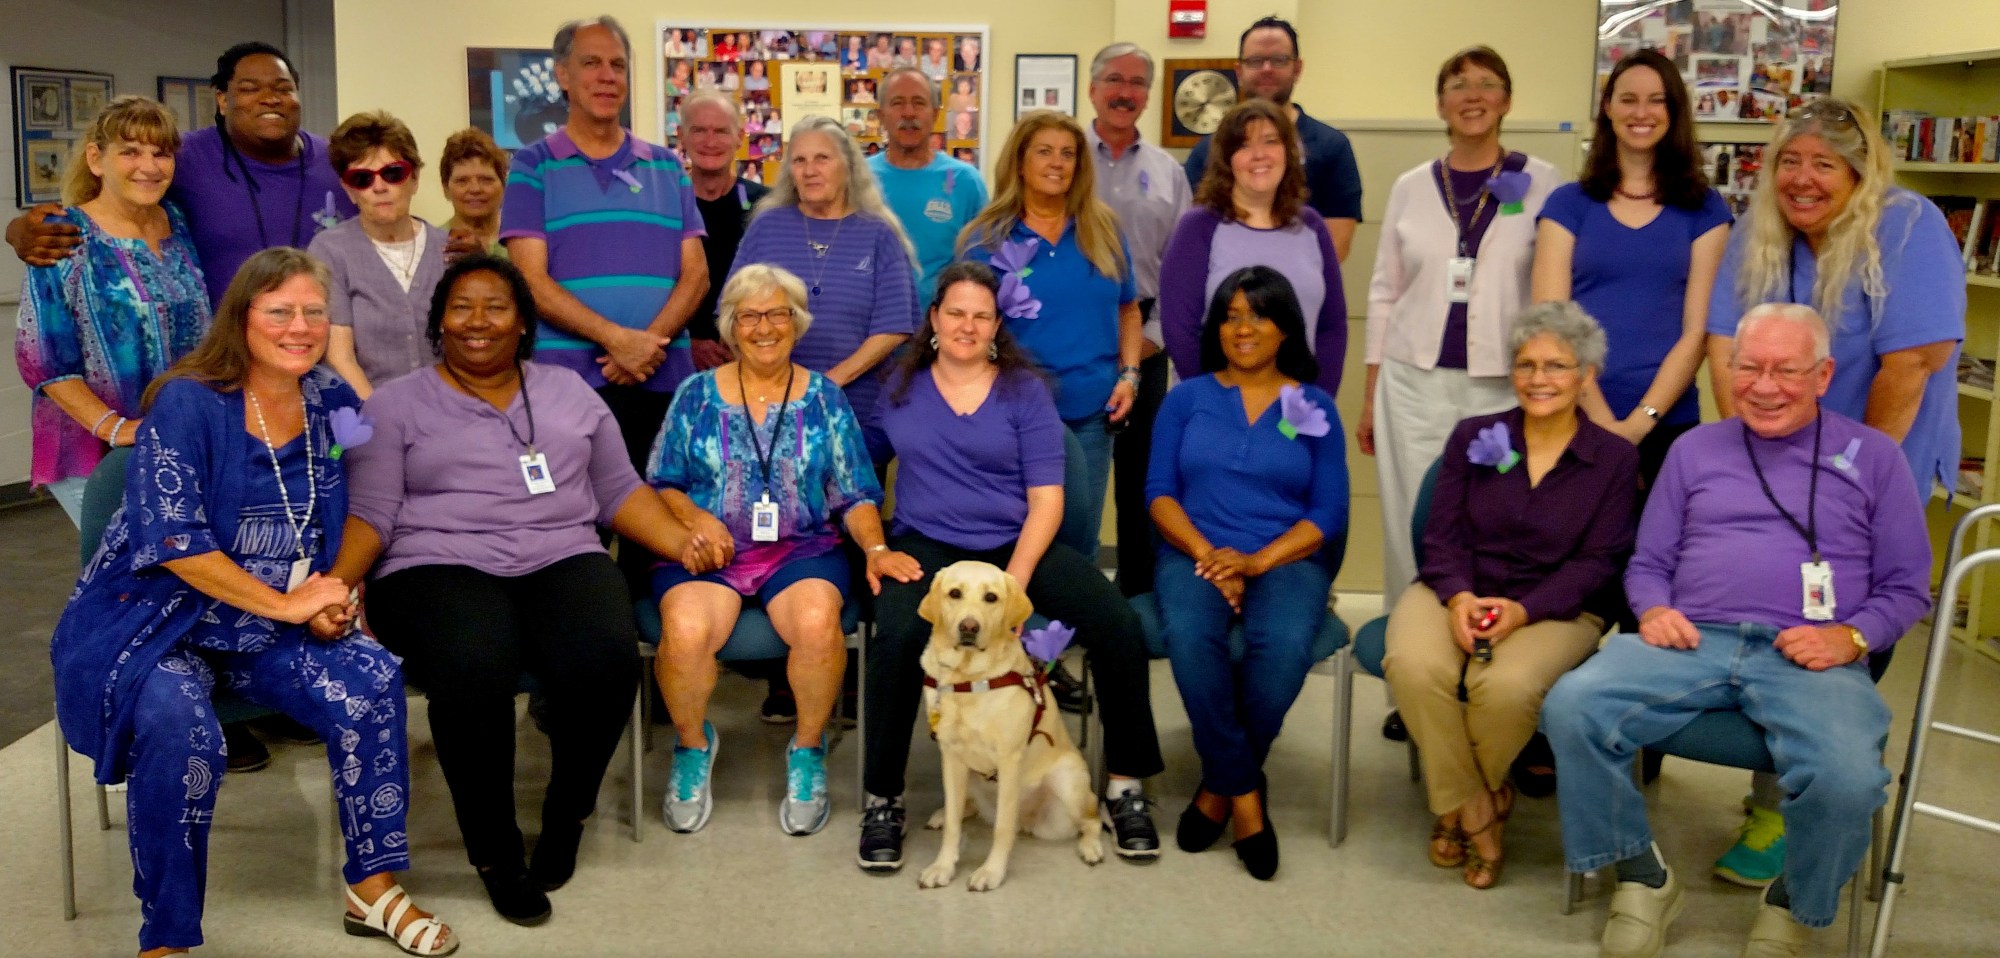 Staff from the Braille and Talking Book Library wear Purple for Month of the Military Child